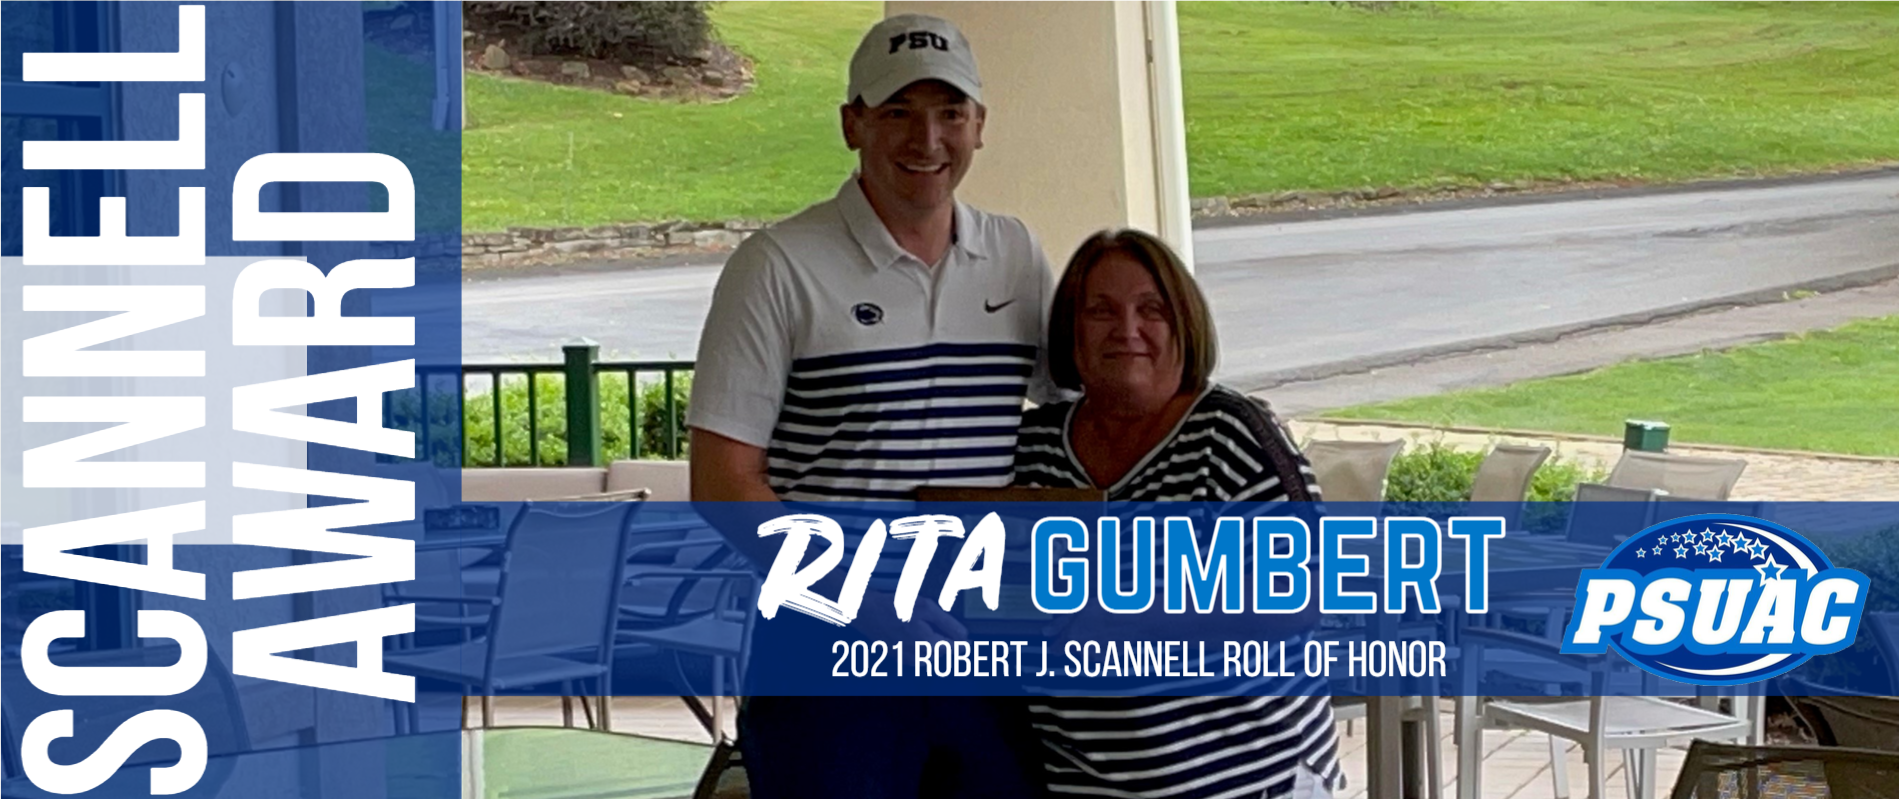 Penn State Fayette's Rita Gumbert was named to the PSUAC's Robert J. Scannell Roll of Honor for her contributions to her campus athletics program and the PSUAC.